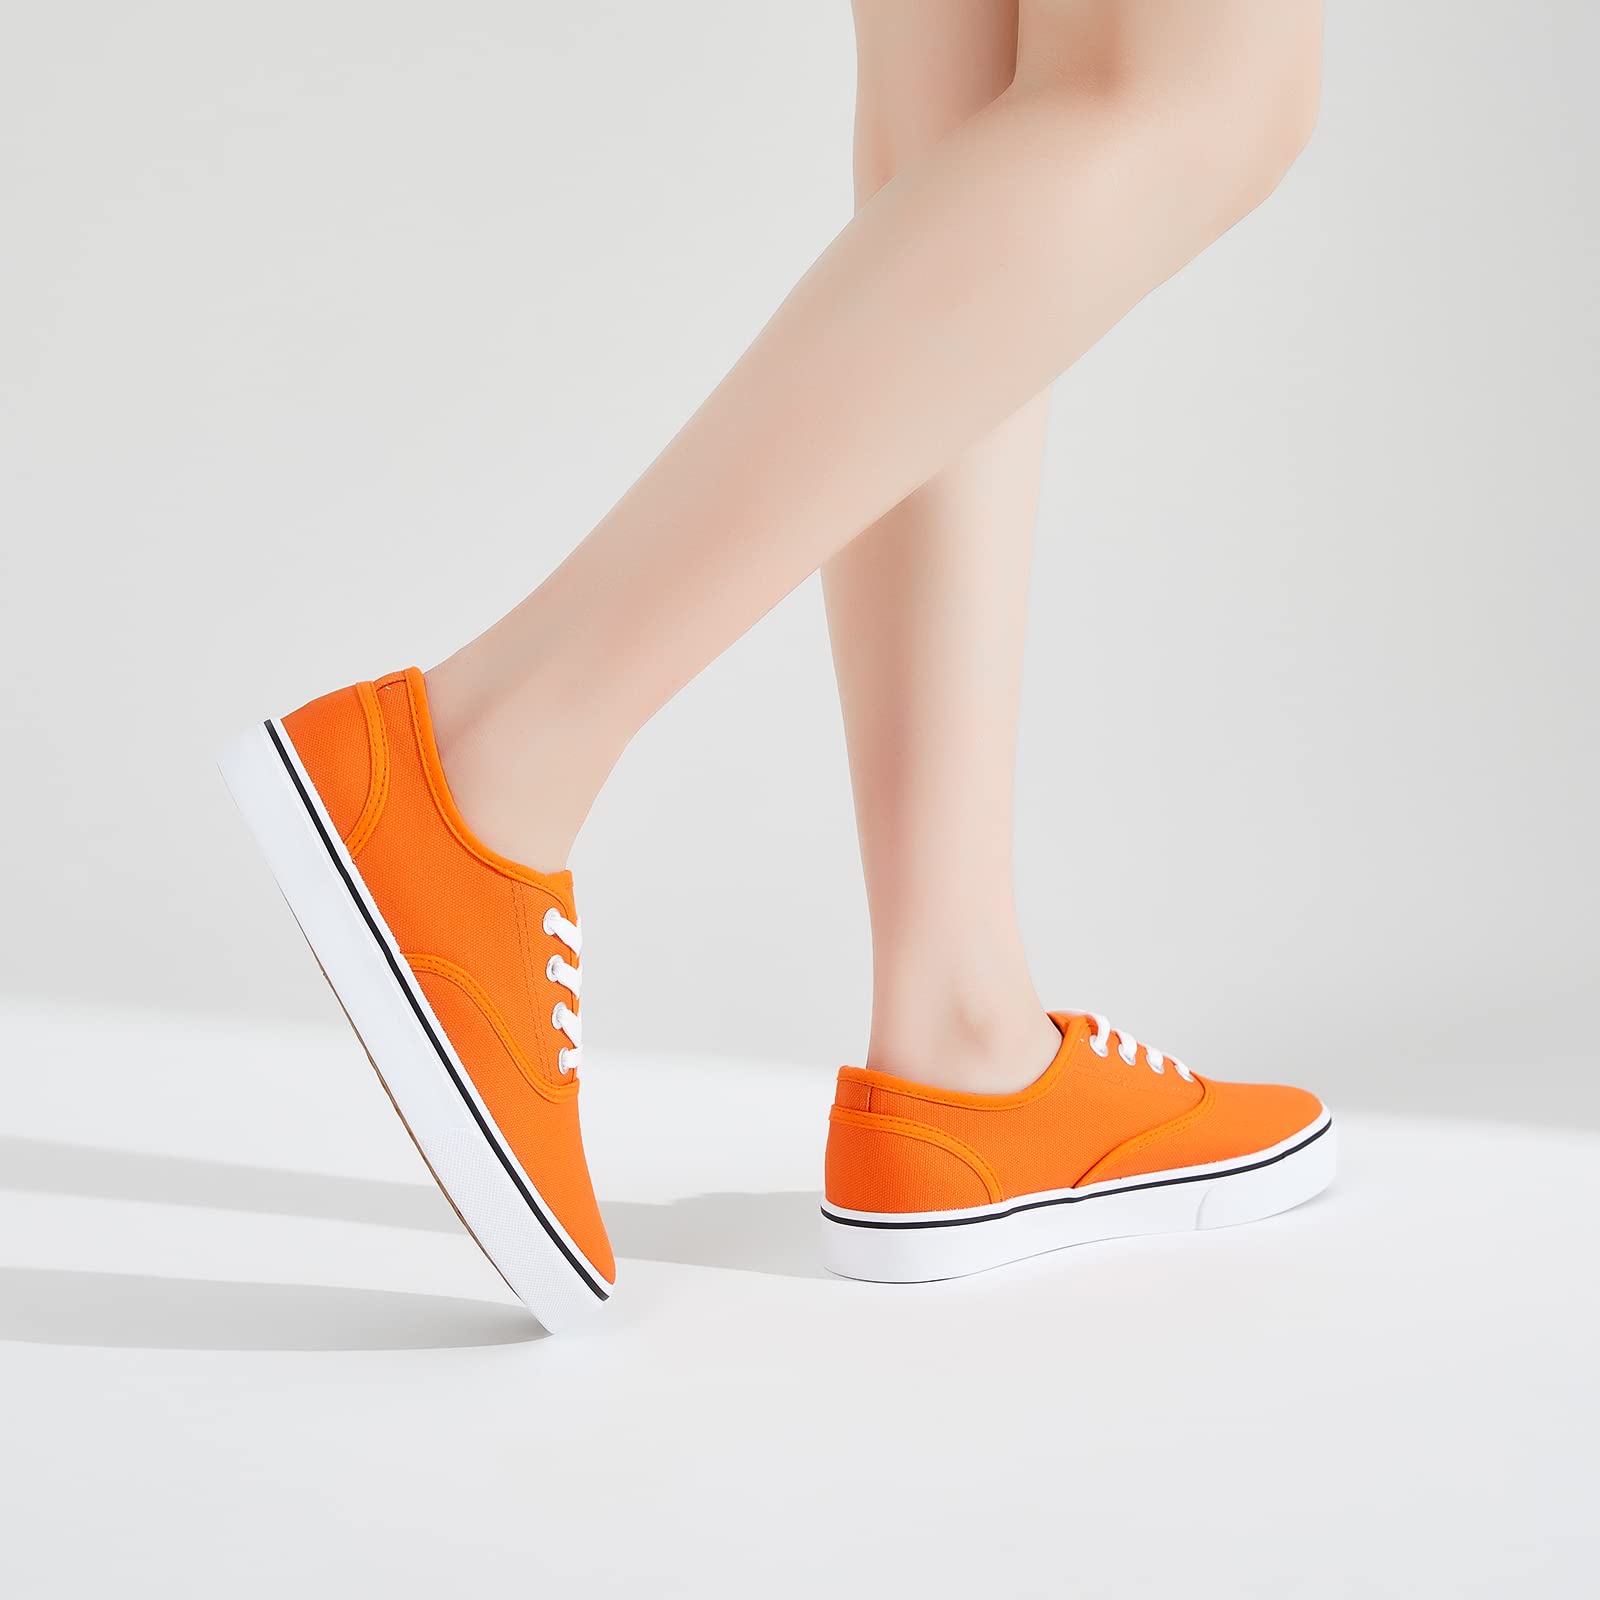 Womens Canvas Shoes Low Cut Canvas Sneakers Walking Running Shoes(Orange,us10)